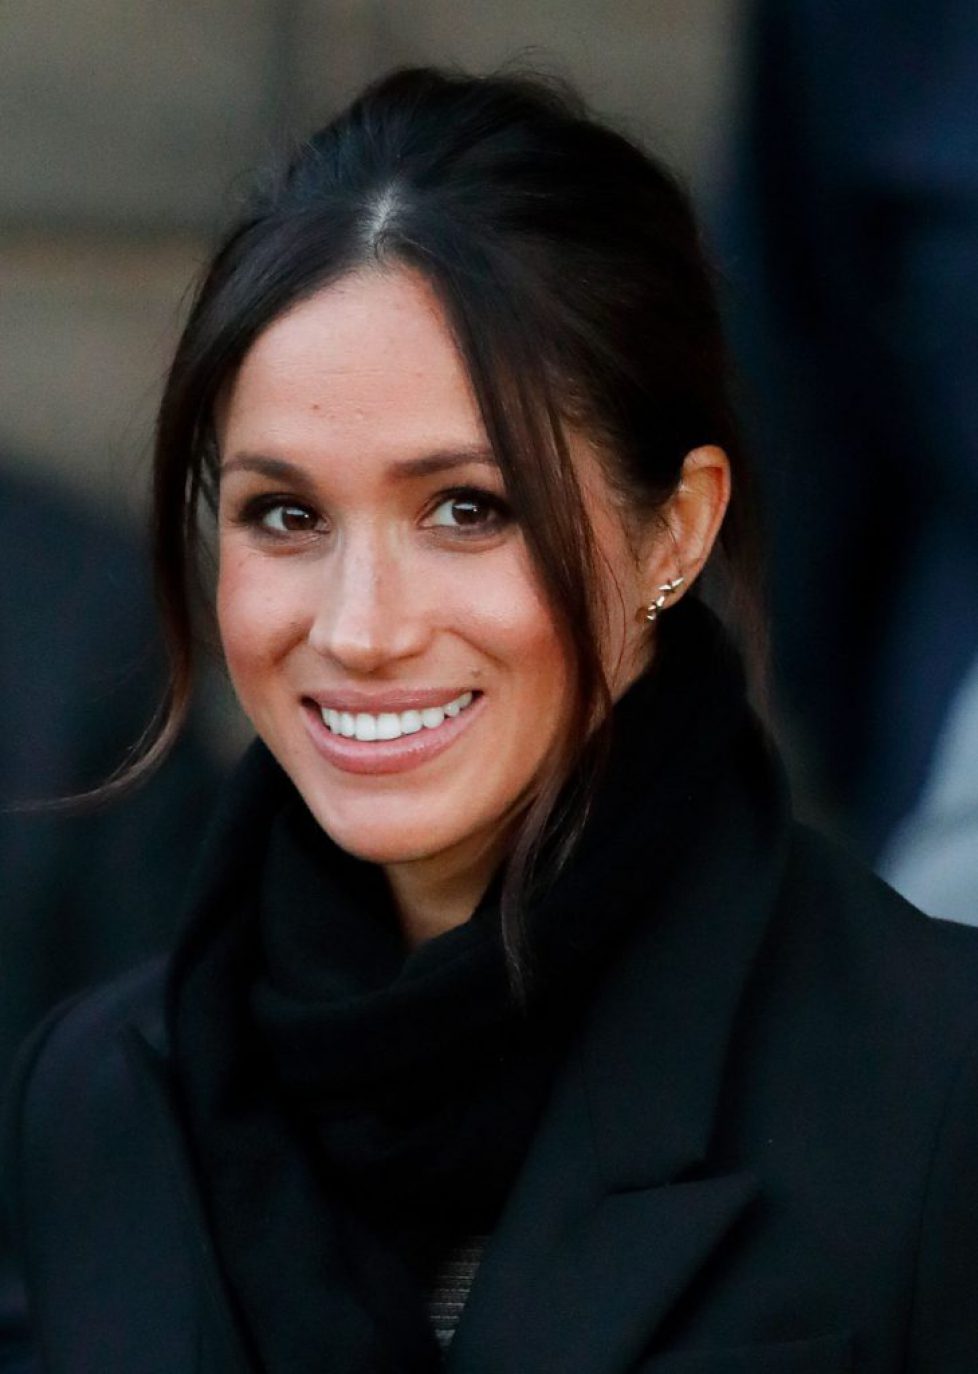 meghan-markle-and-prince-harry-visits-cardiff-castle-in-cardiff-5